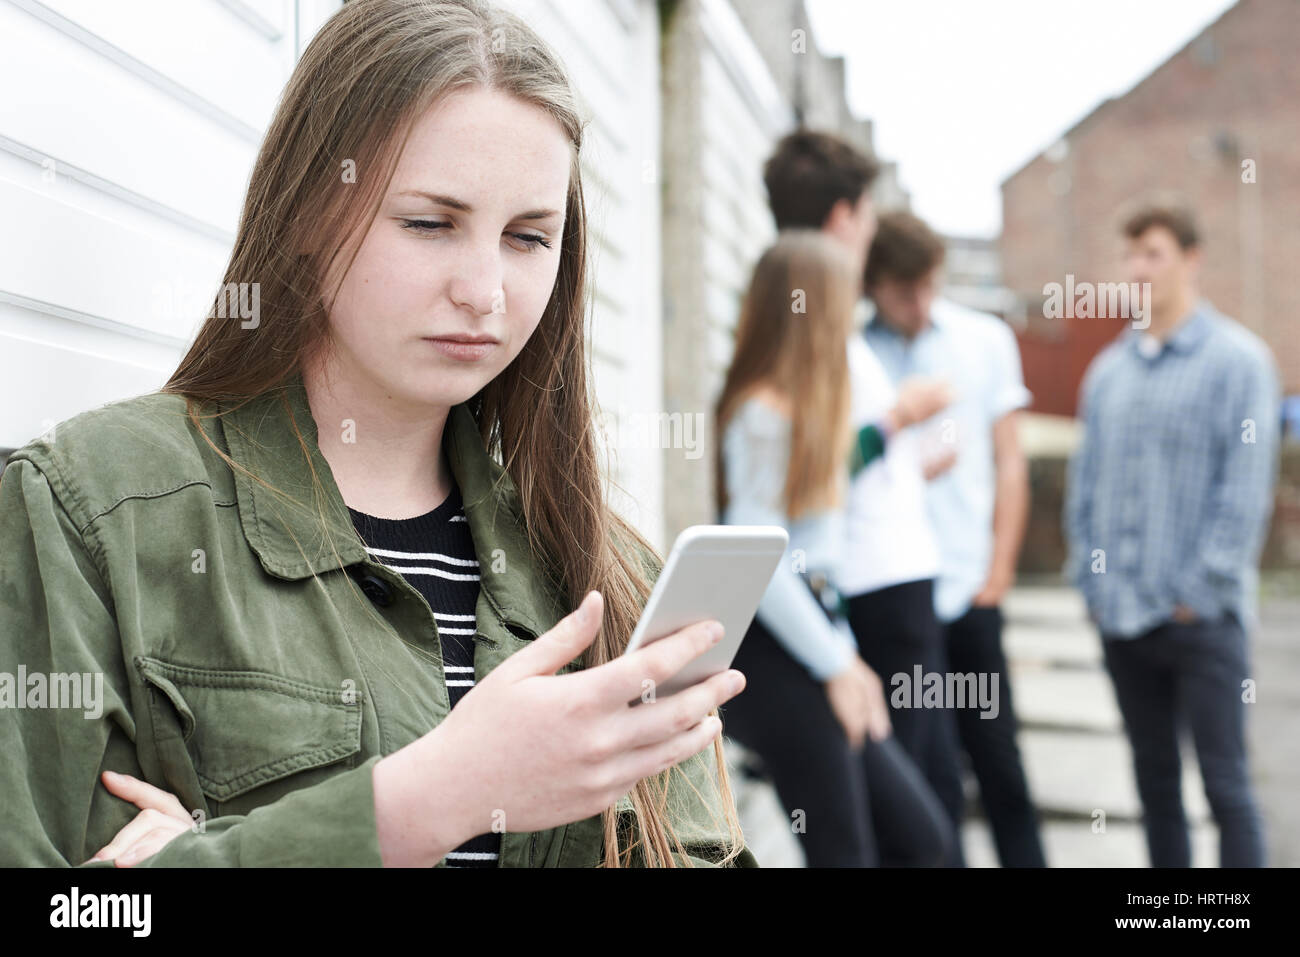 Teenage Girl Victim Of Bullying By Text Messaging Stock Photo